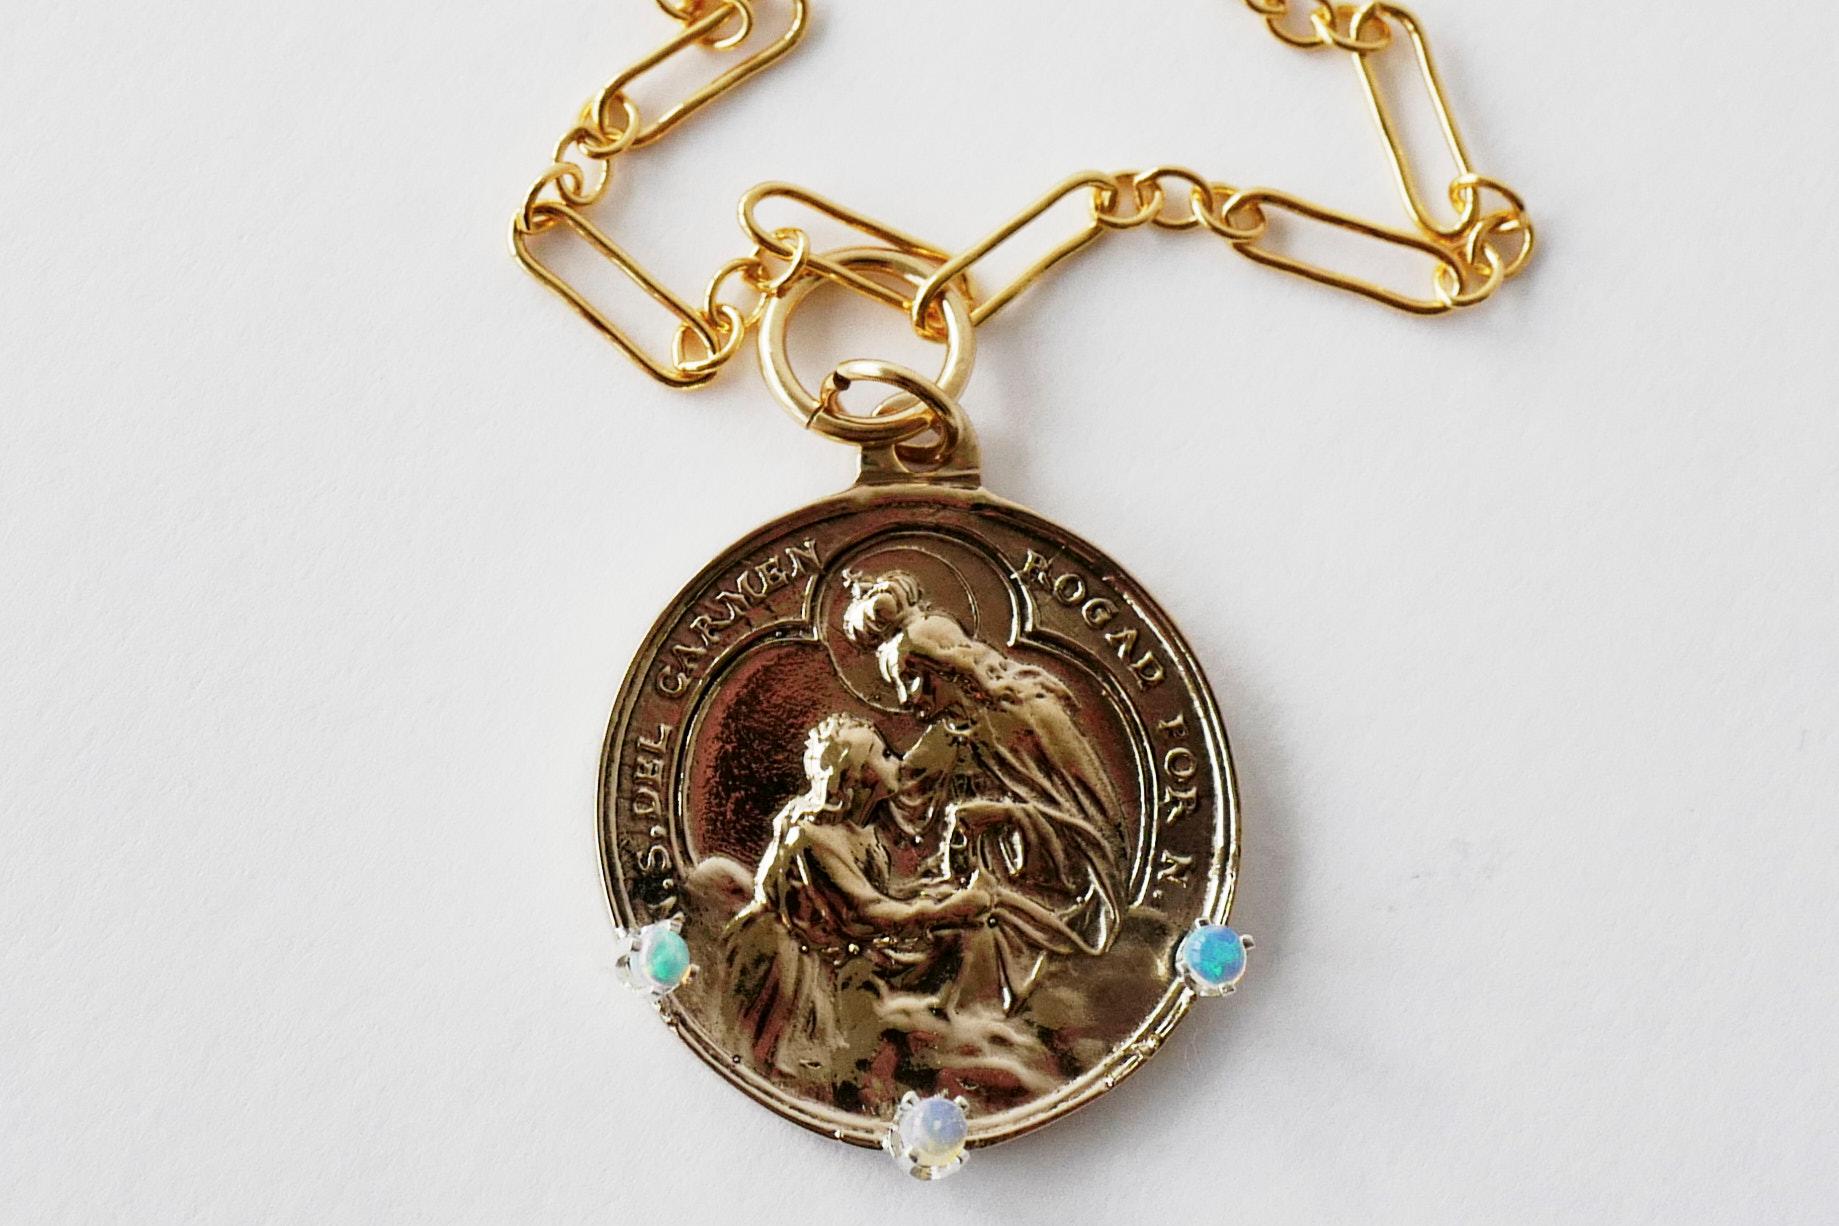 Opal Virgin Mary Medal Chain Necklace Pendant J Dauphin In New Condition For Sale In Los Angeles, CA